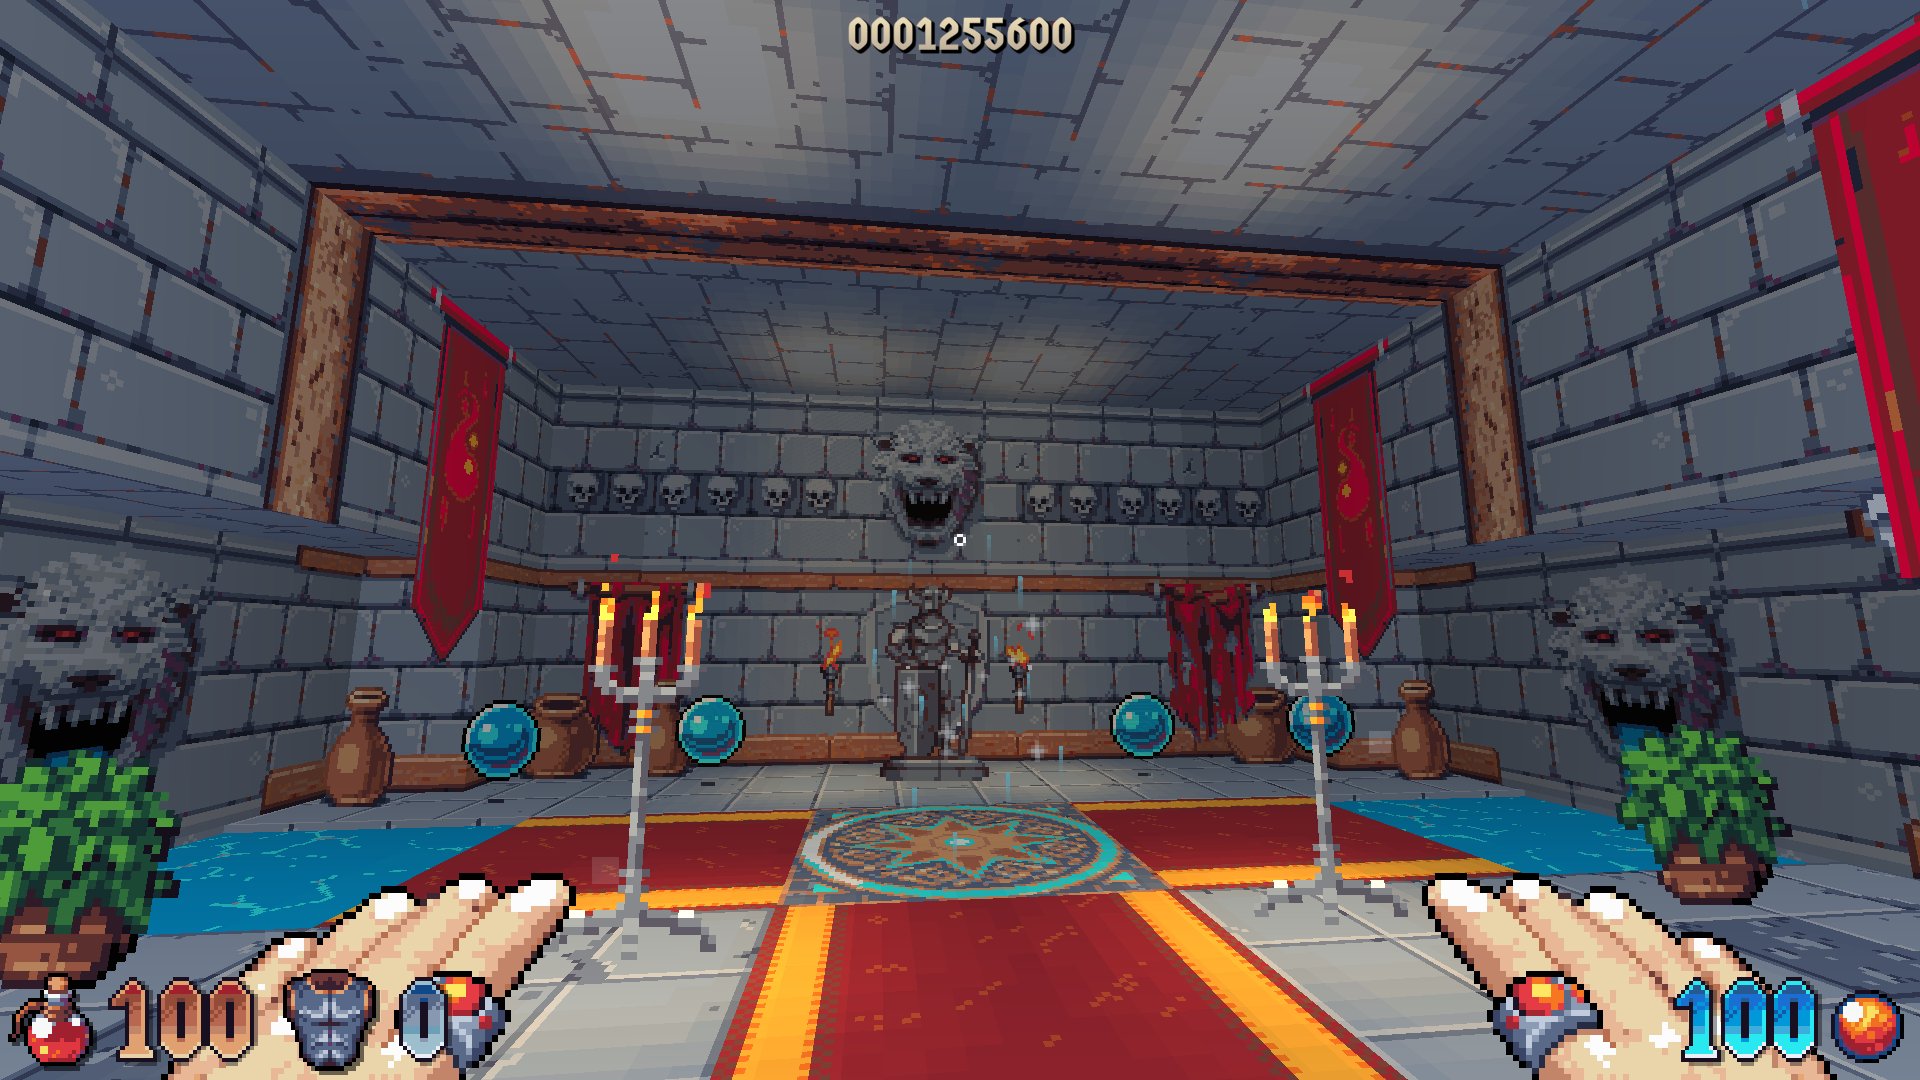 Player's POV, an interior castle chamber decorated with red banners, skulls, and lions.